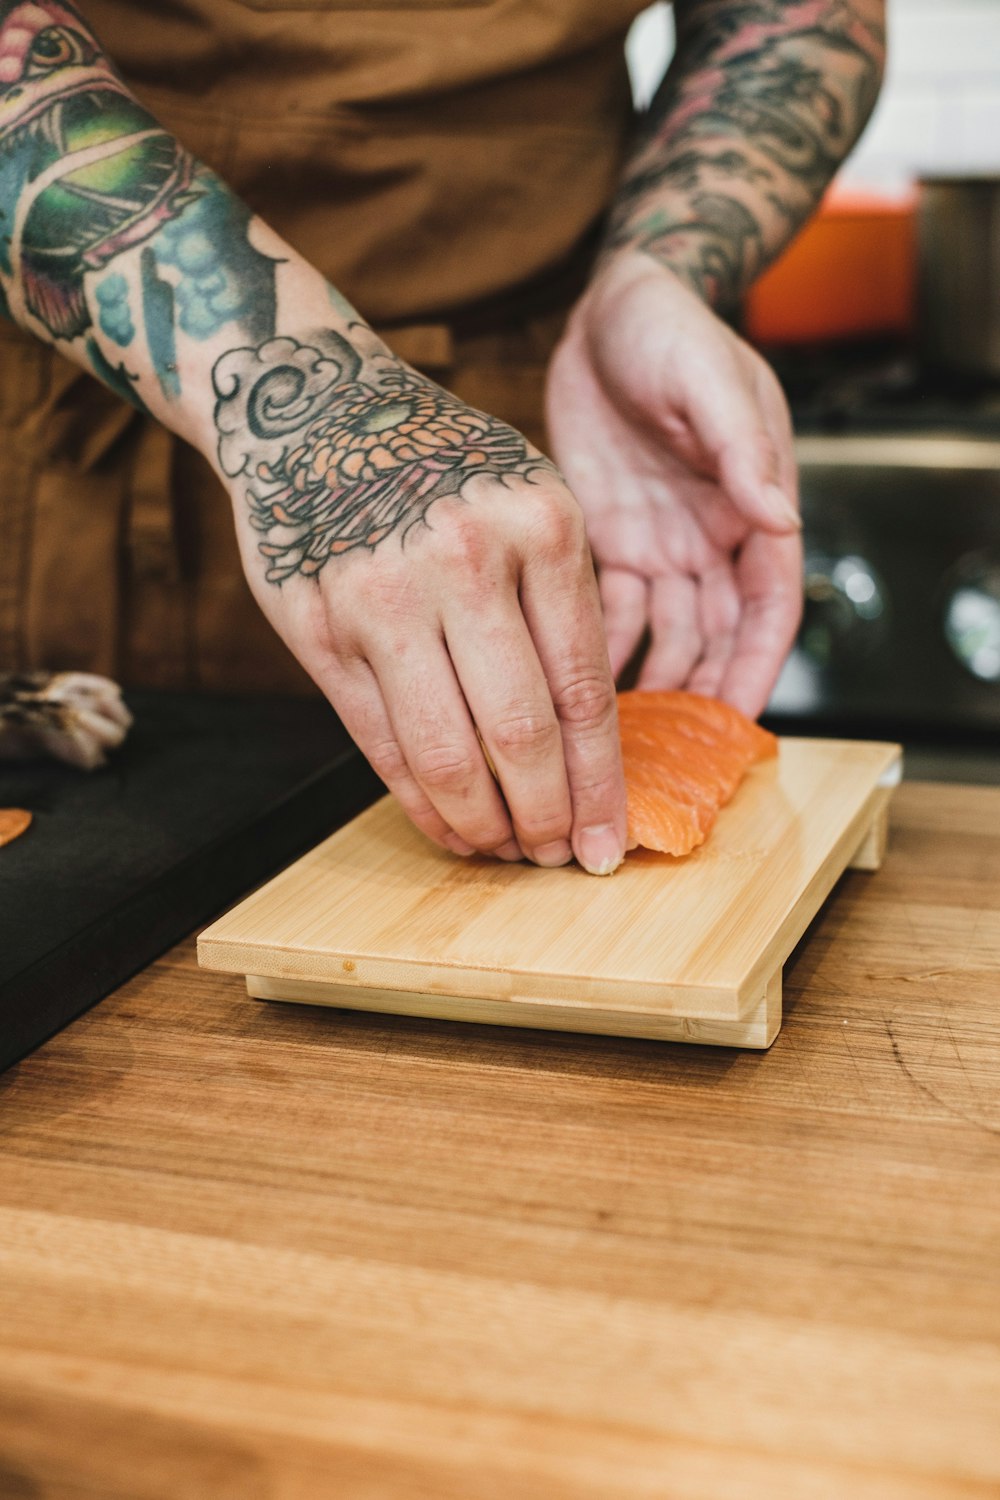 a man with a tattoo on his arm cutting up a salmon on a cutting board